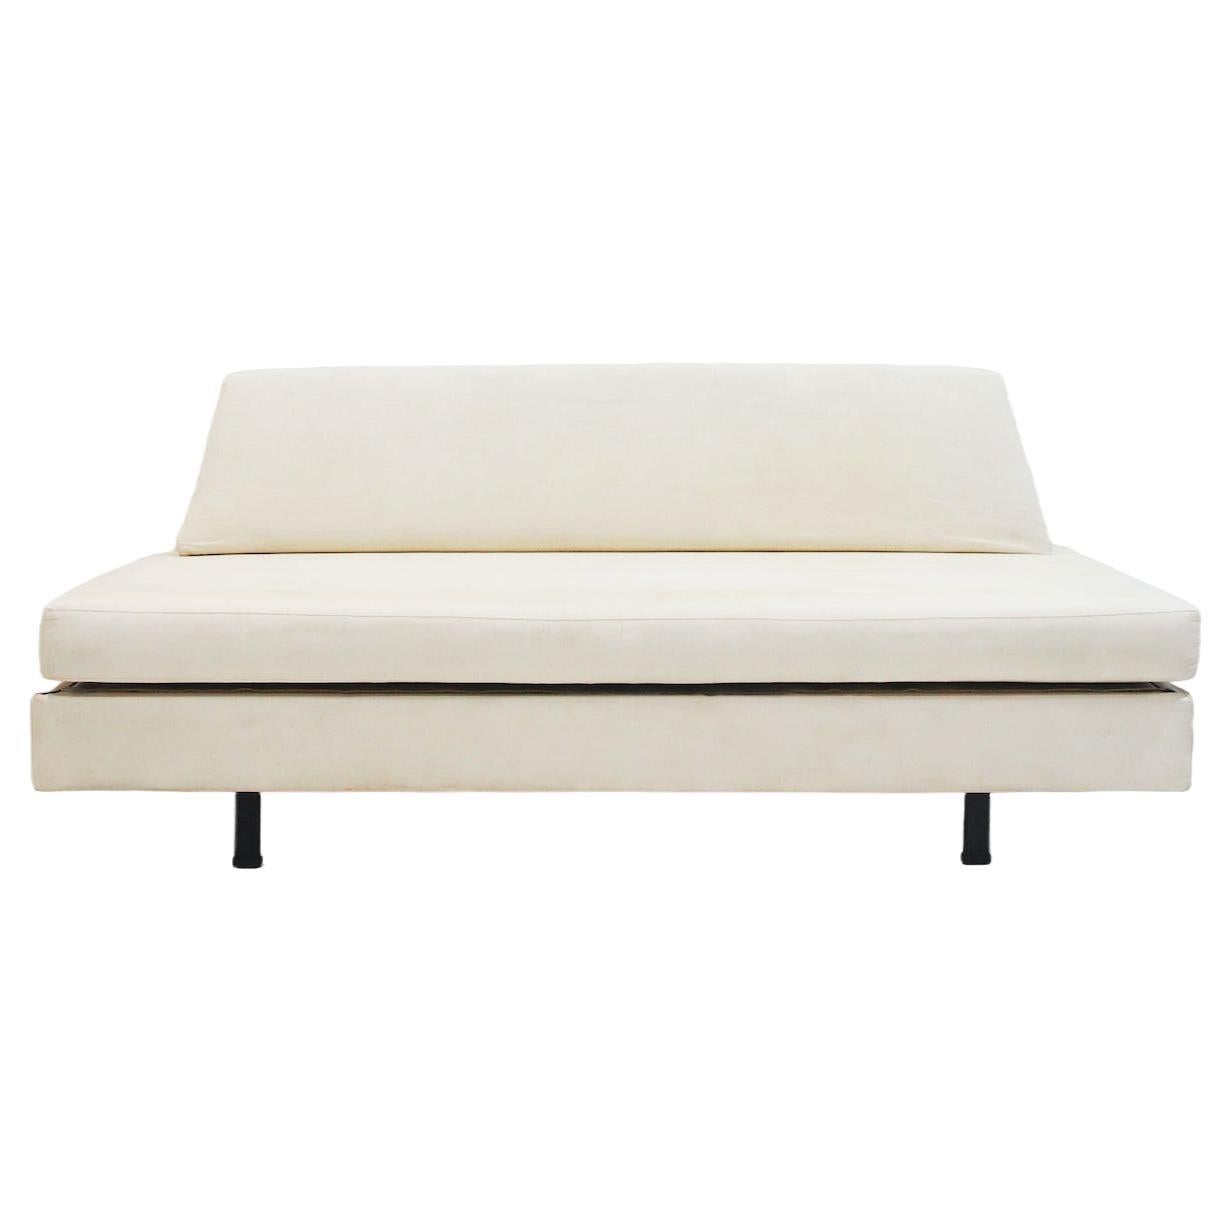 Italian Modernist Daybed with White Upholstery and Iron Frame